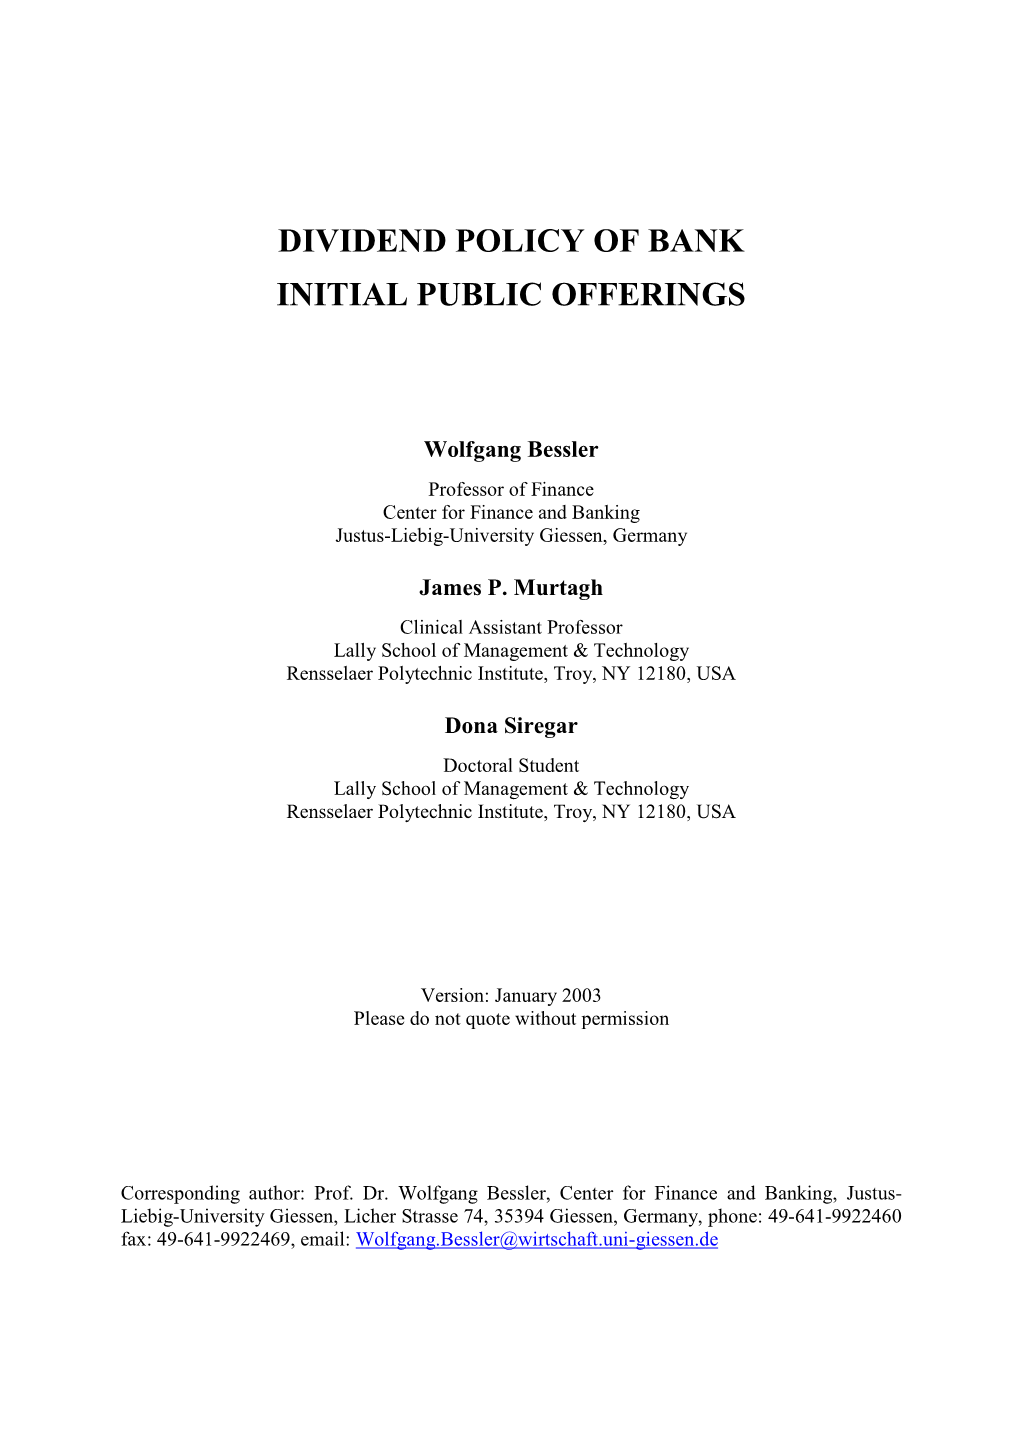 Dividend Policy of Bank